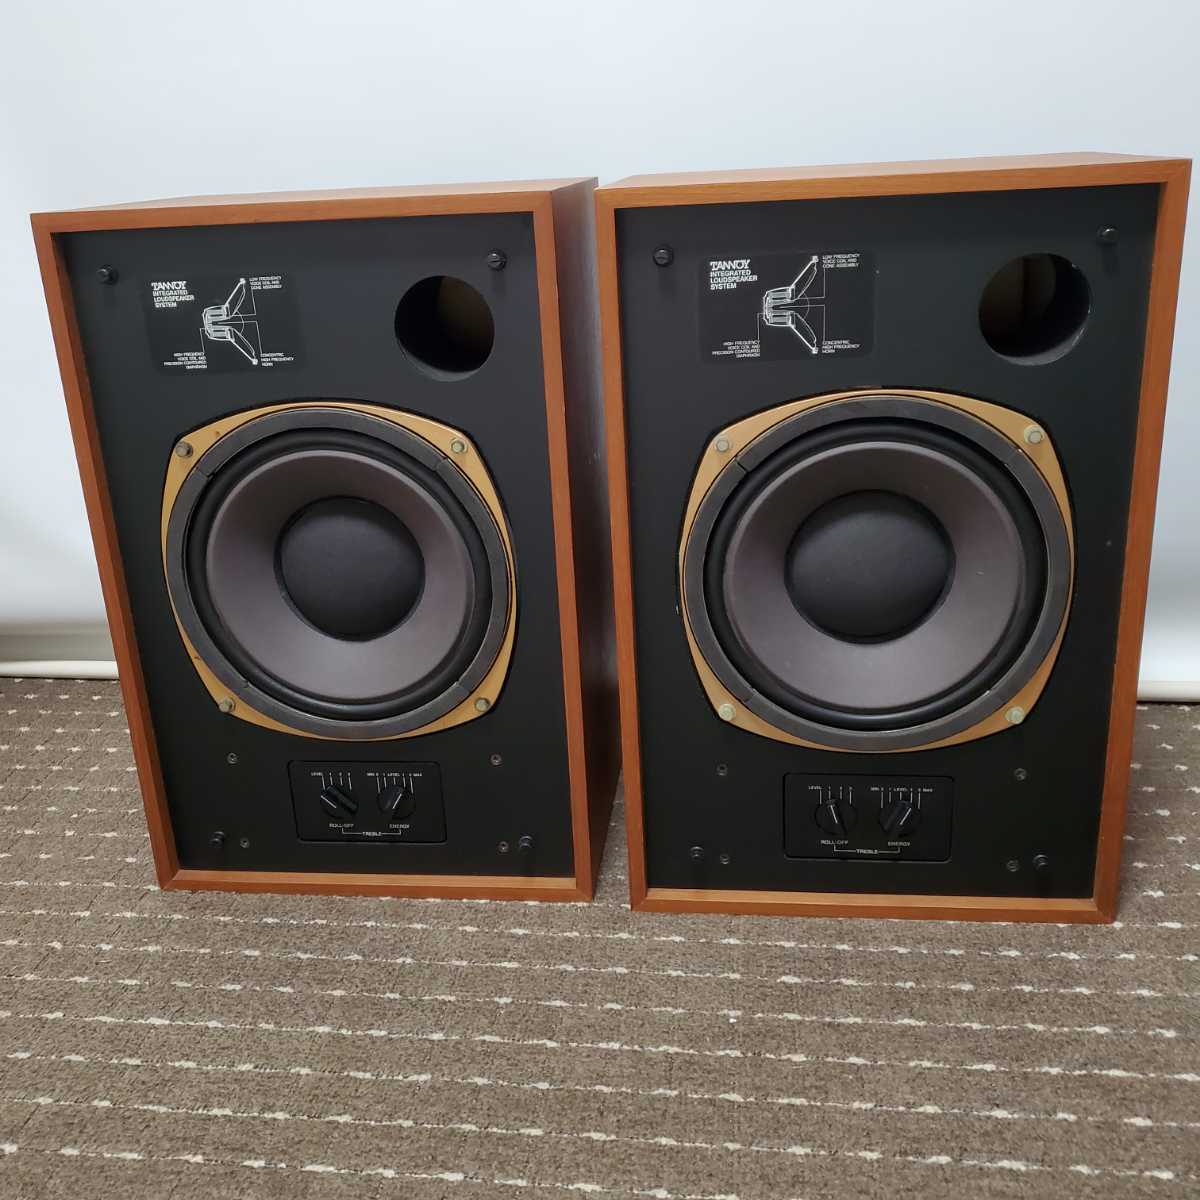  prompt decision TANNOY HPD295A Eaton speaker pair pick up welcome 